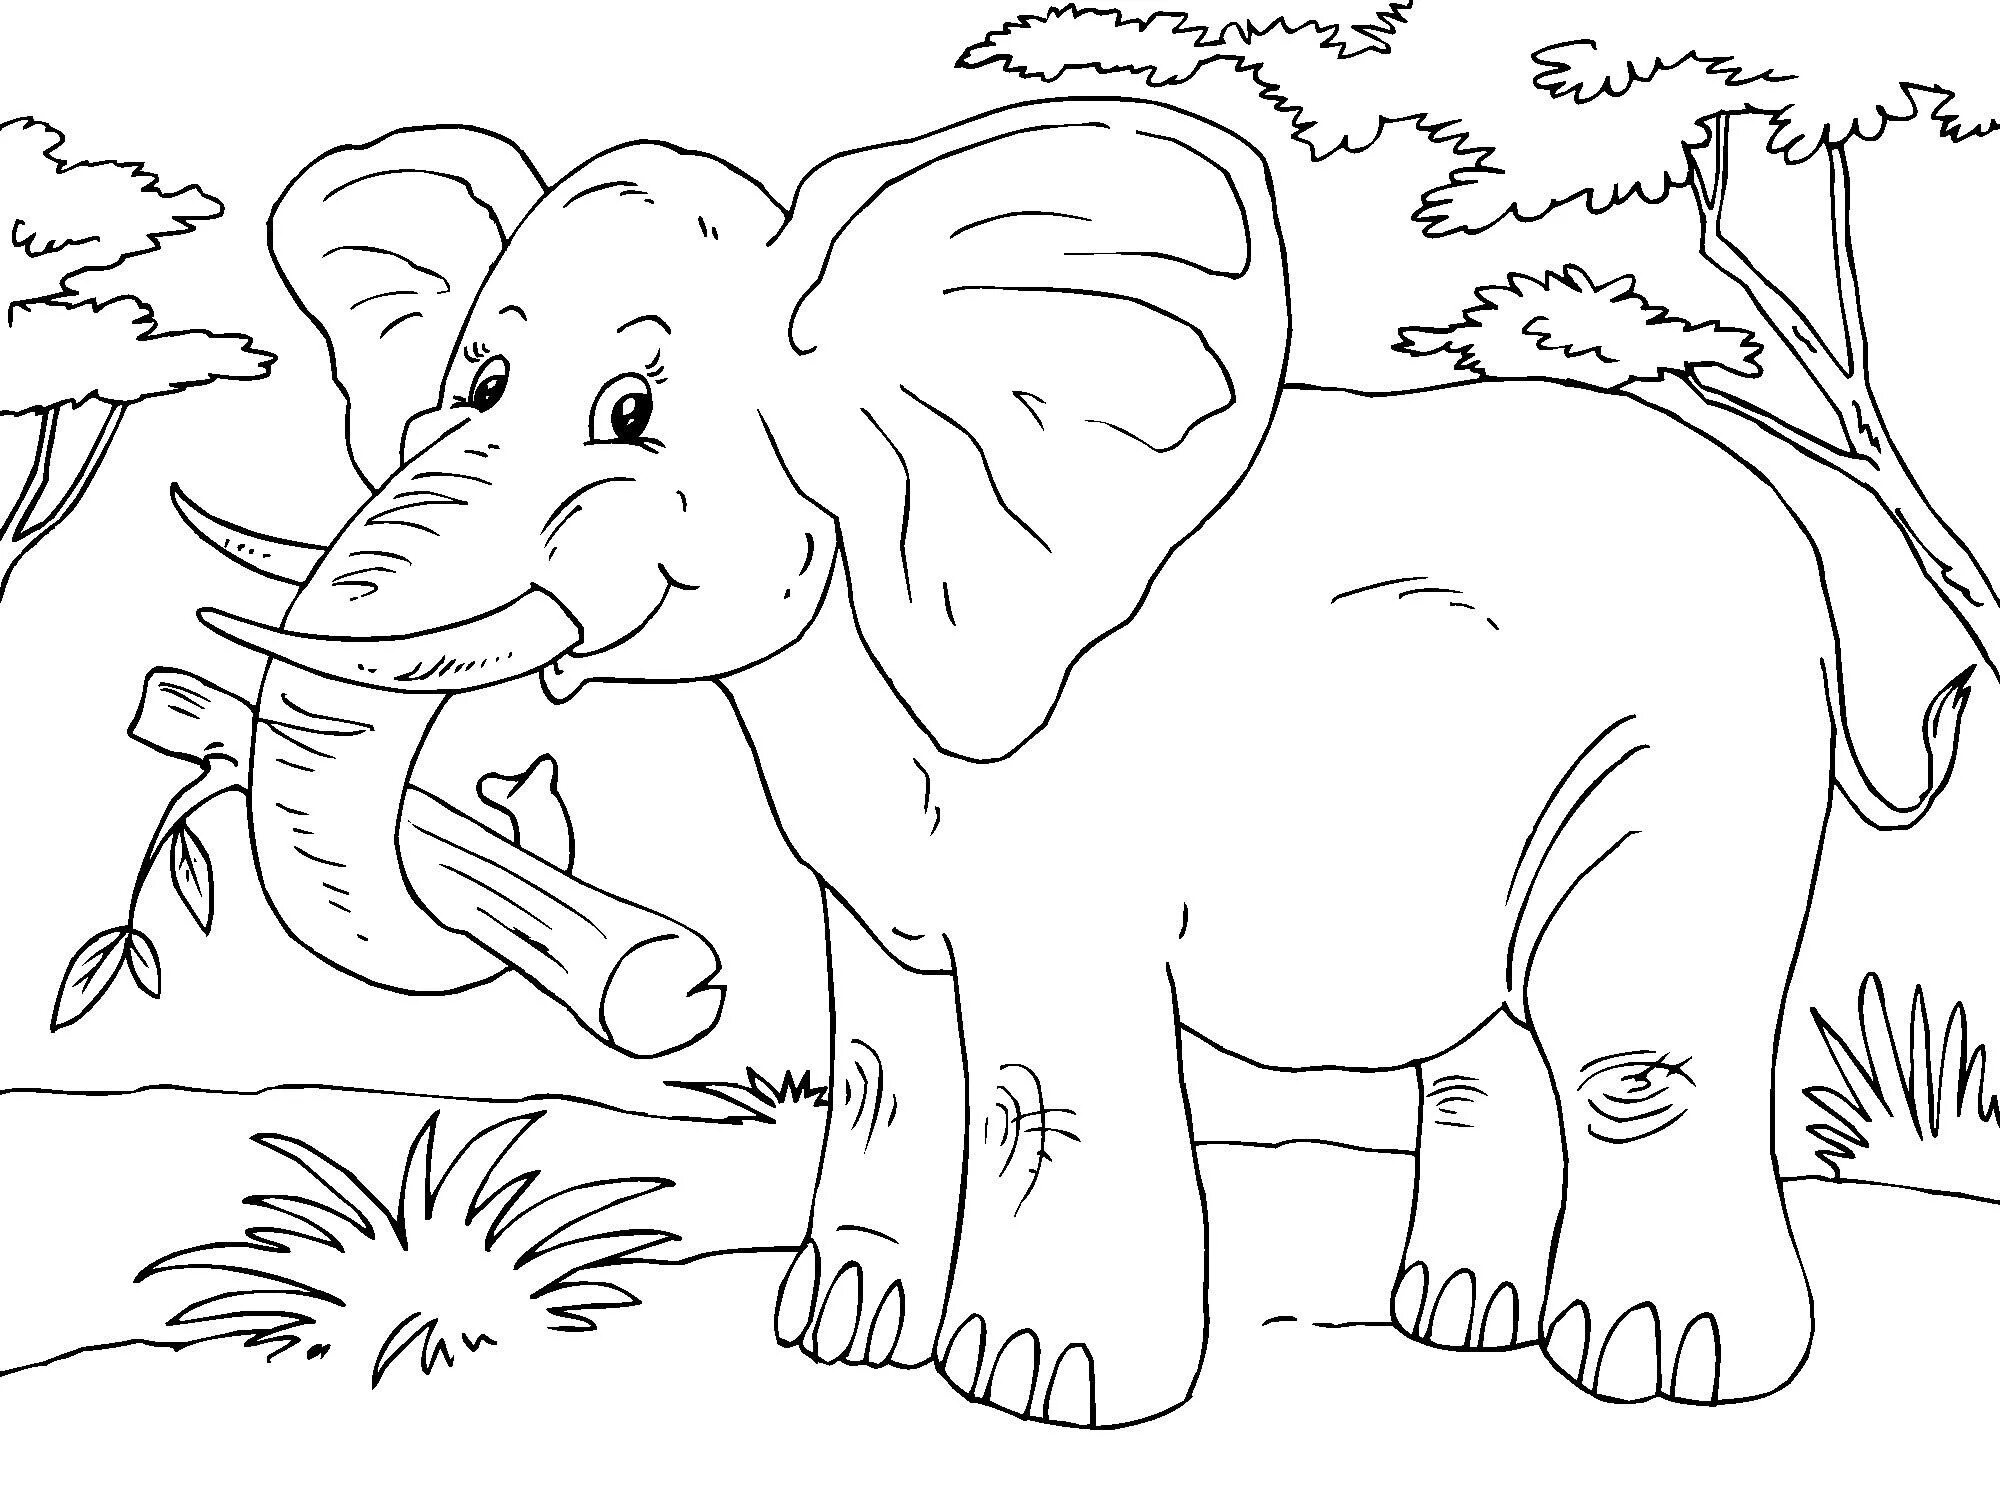 Large wild animal coloring page for preschoolers